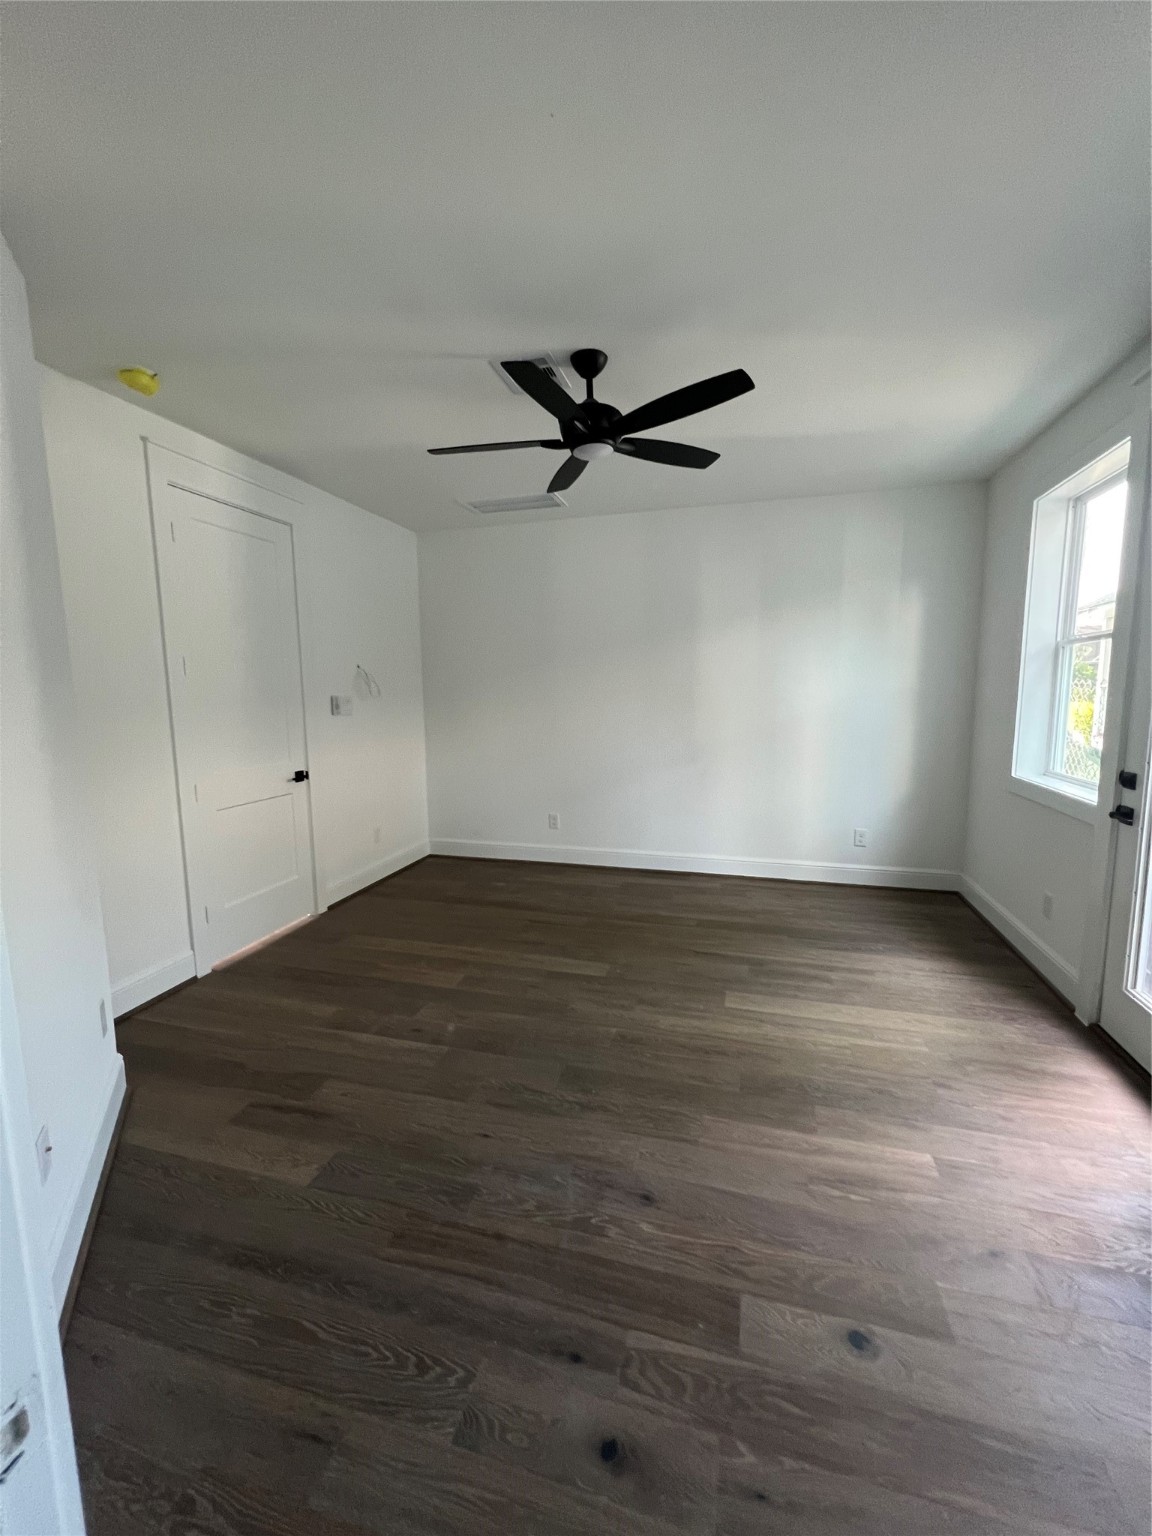 The Primary bedroom does not dissapoint with white oak floors, iron ore trim and baseboards to coordinate with the detailed ceiling treatment. The modern chandelier and accent wall tie this room together. Speakers are also found here and the family room.